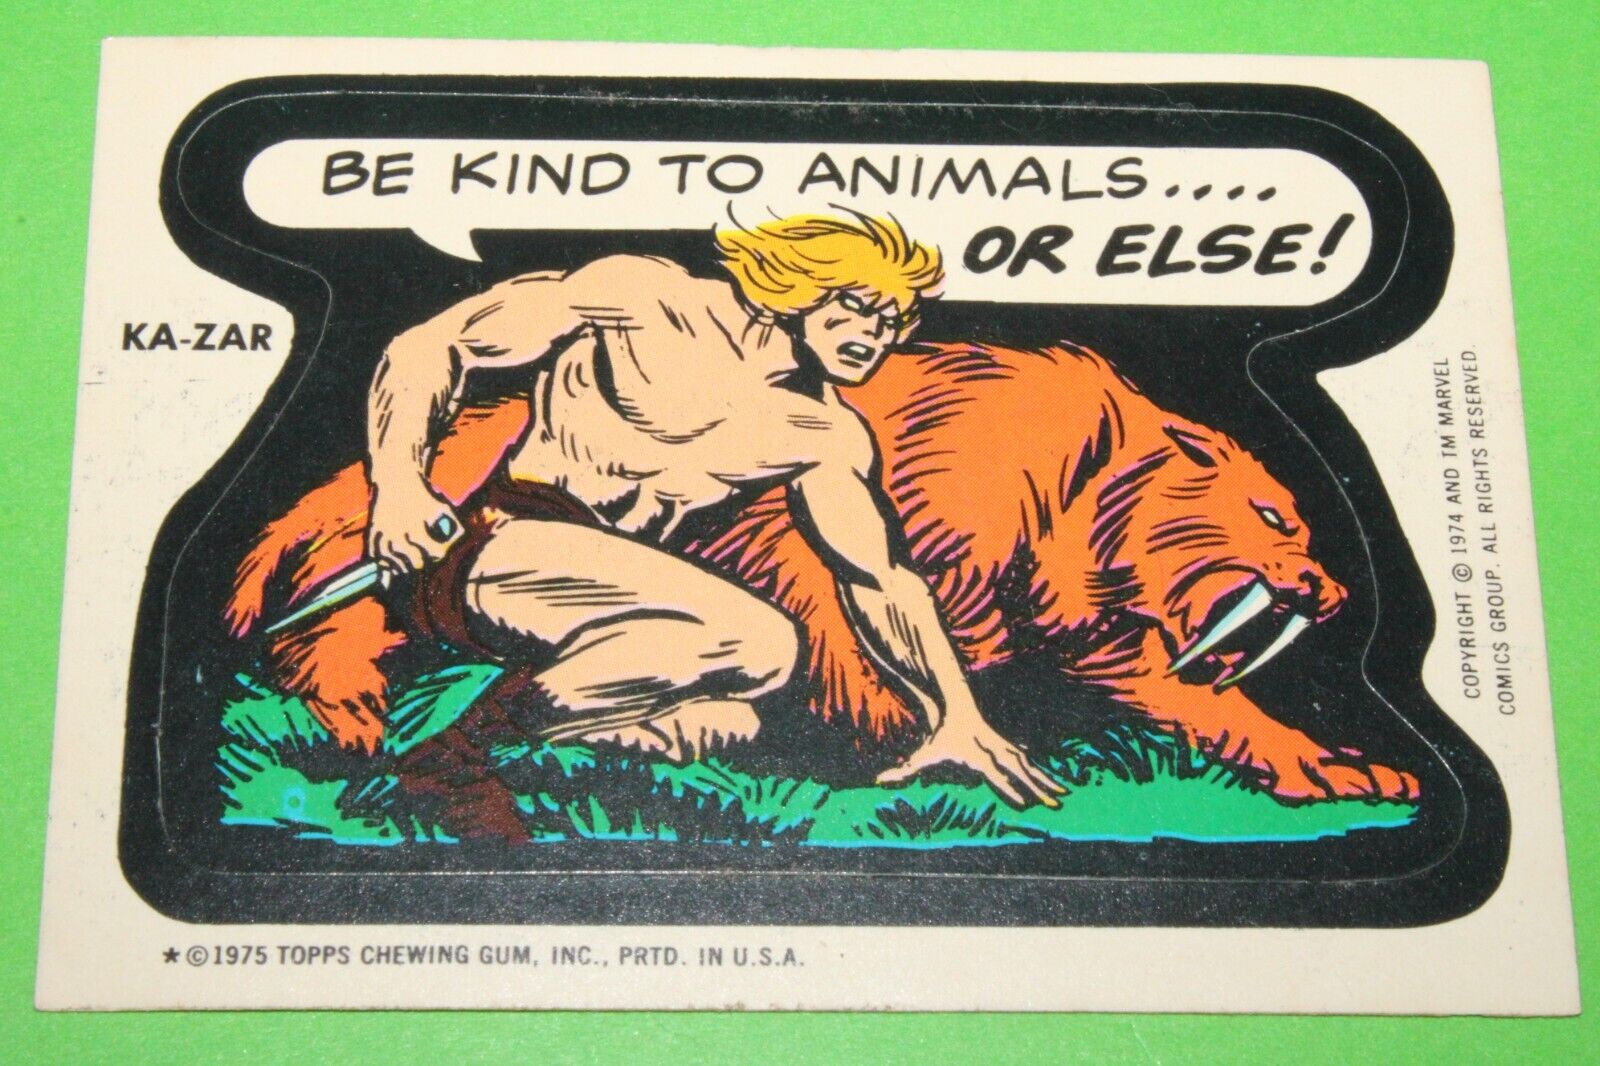 1974 1975 TOPPS MARVEL SUPER HEROES STICKERS KA-ZAR BE KIND TO ANIMALS OR ELSE